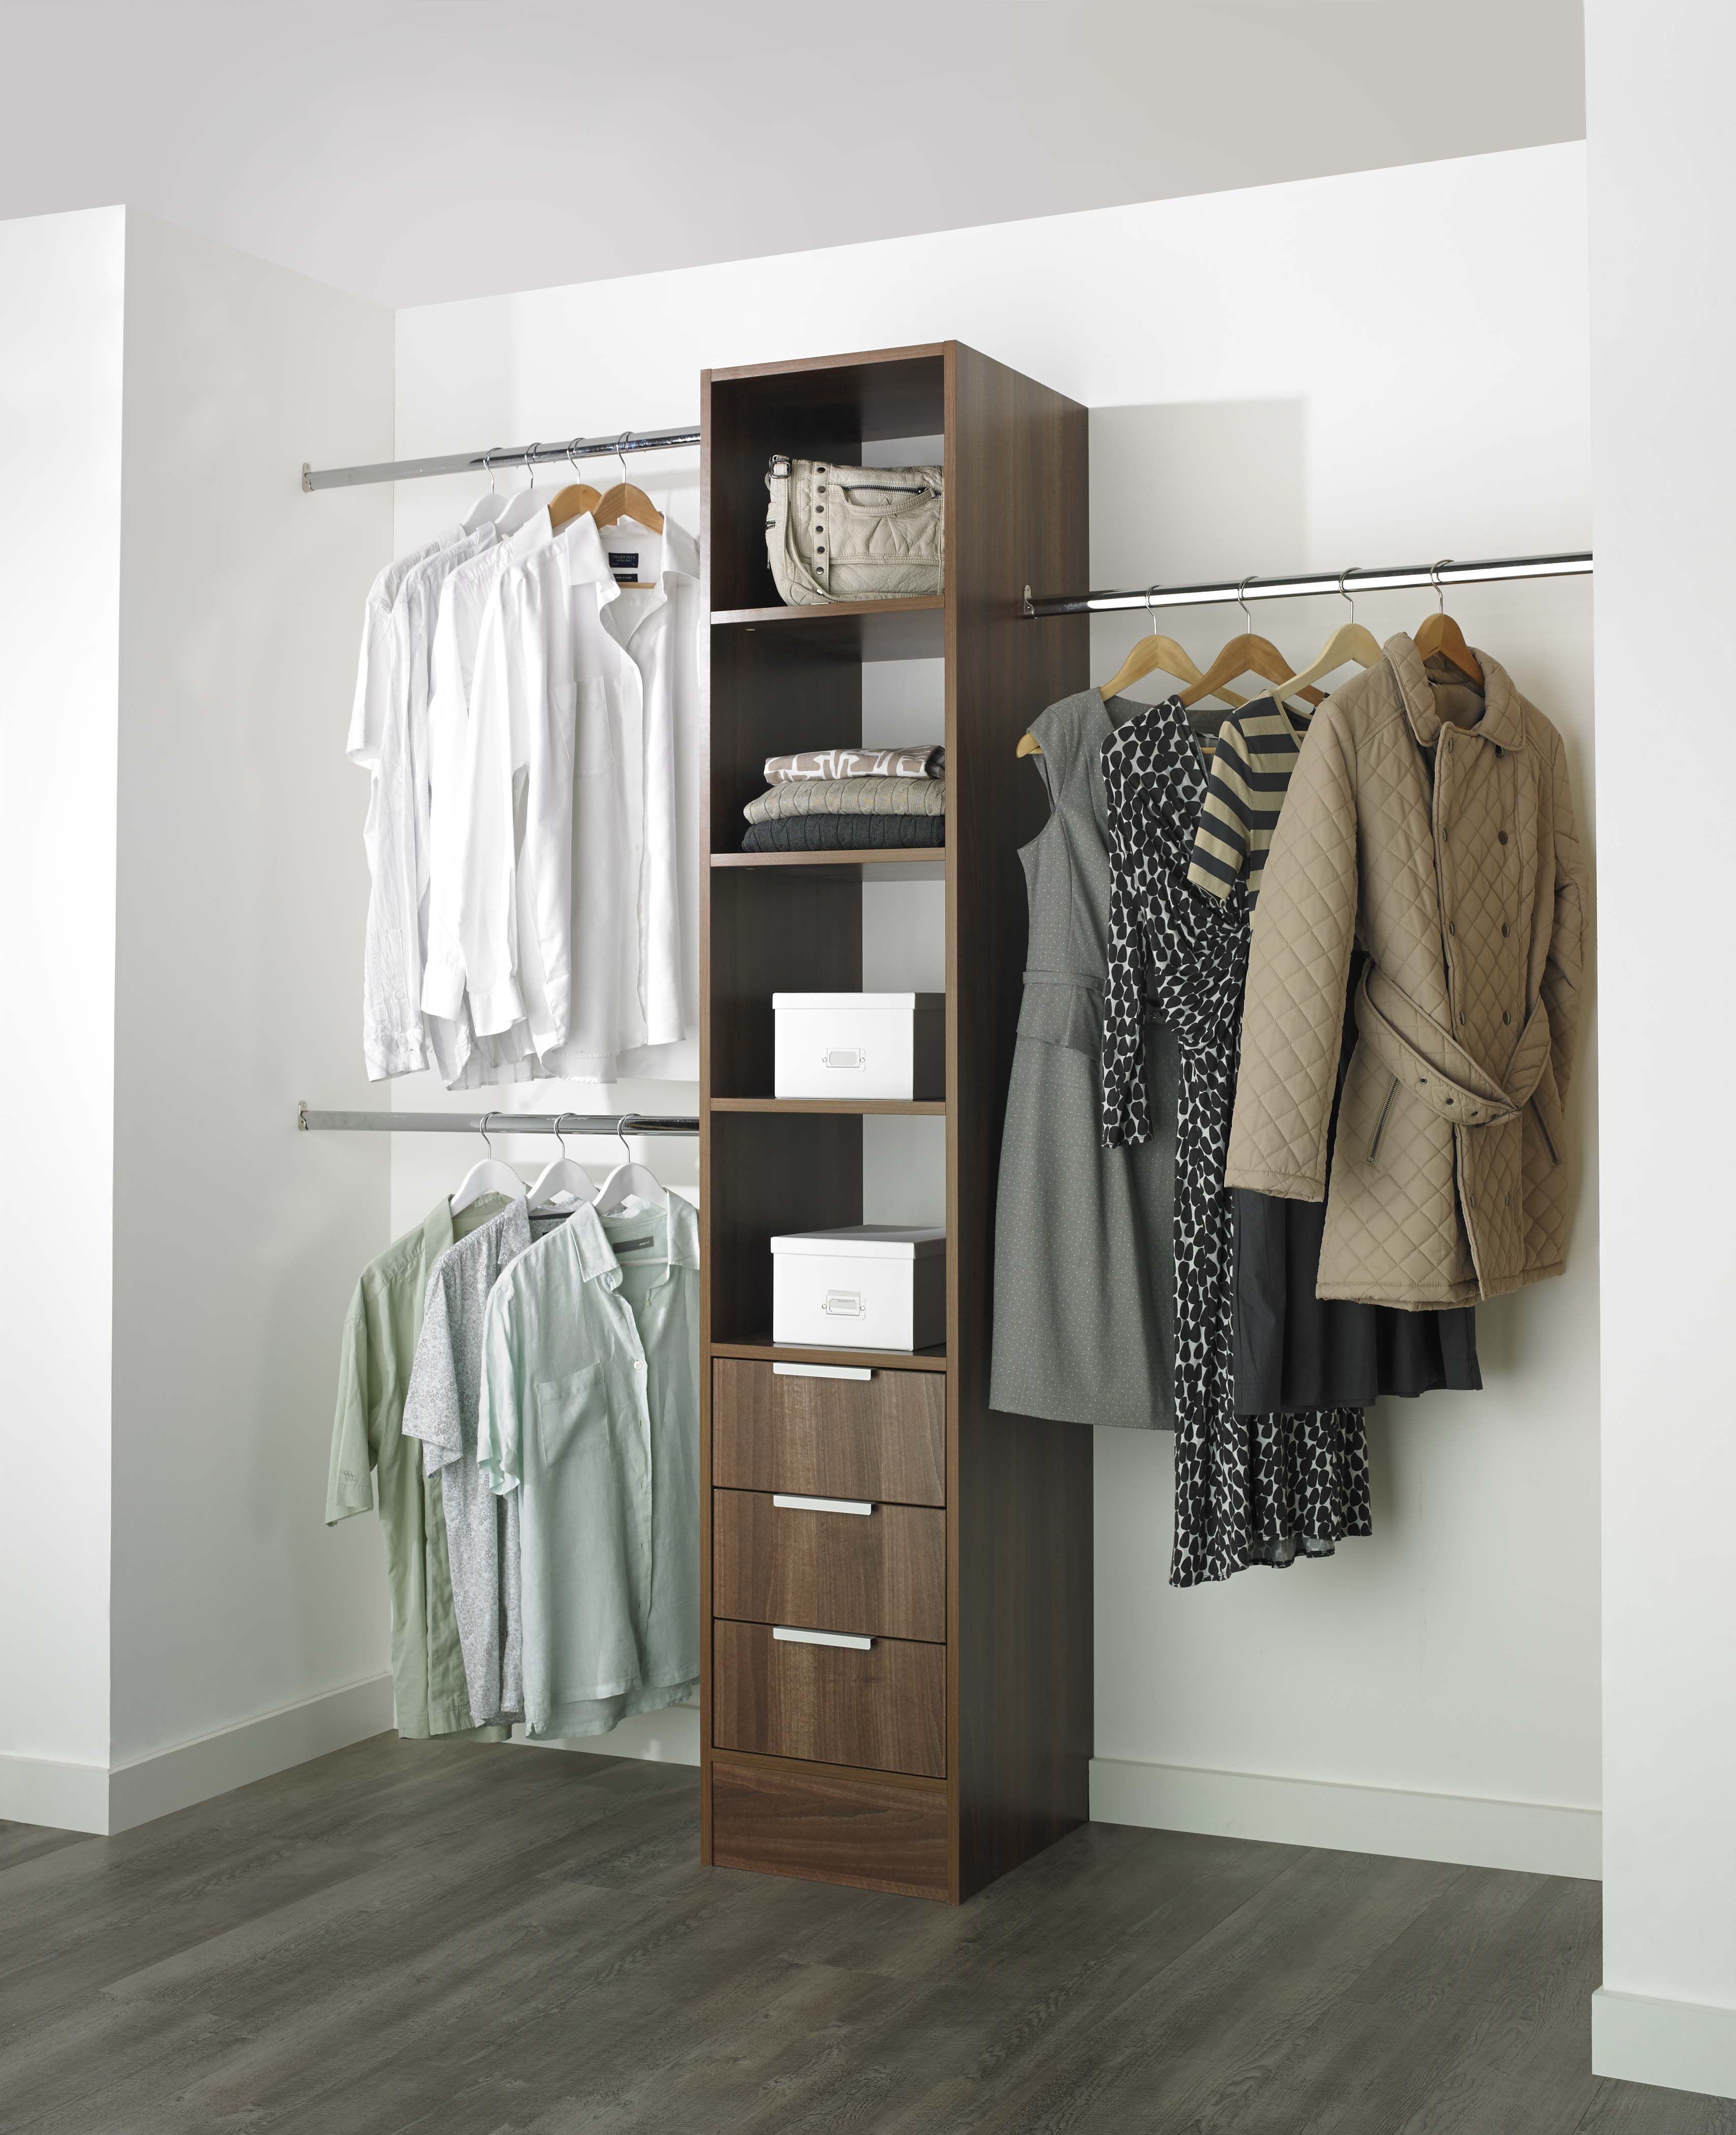 Sliding Wardrobe Interiors Kits | Economy, Designer & Premium Ranges | Intended For Wardrobes With 3 Shelving Towers (View 16 of 20)